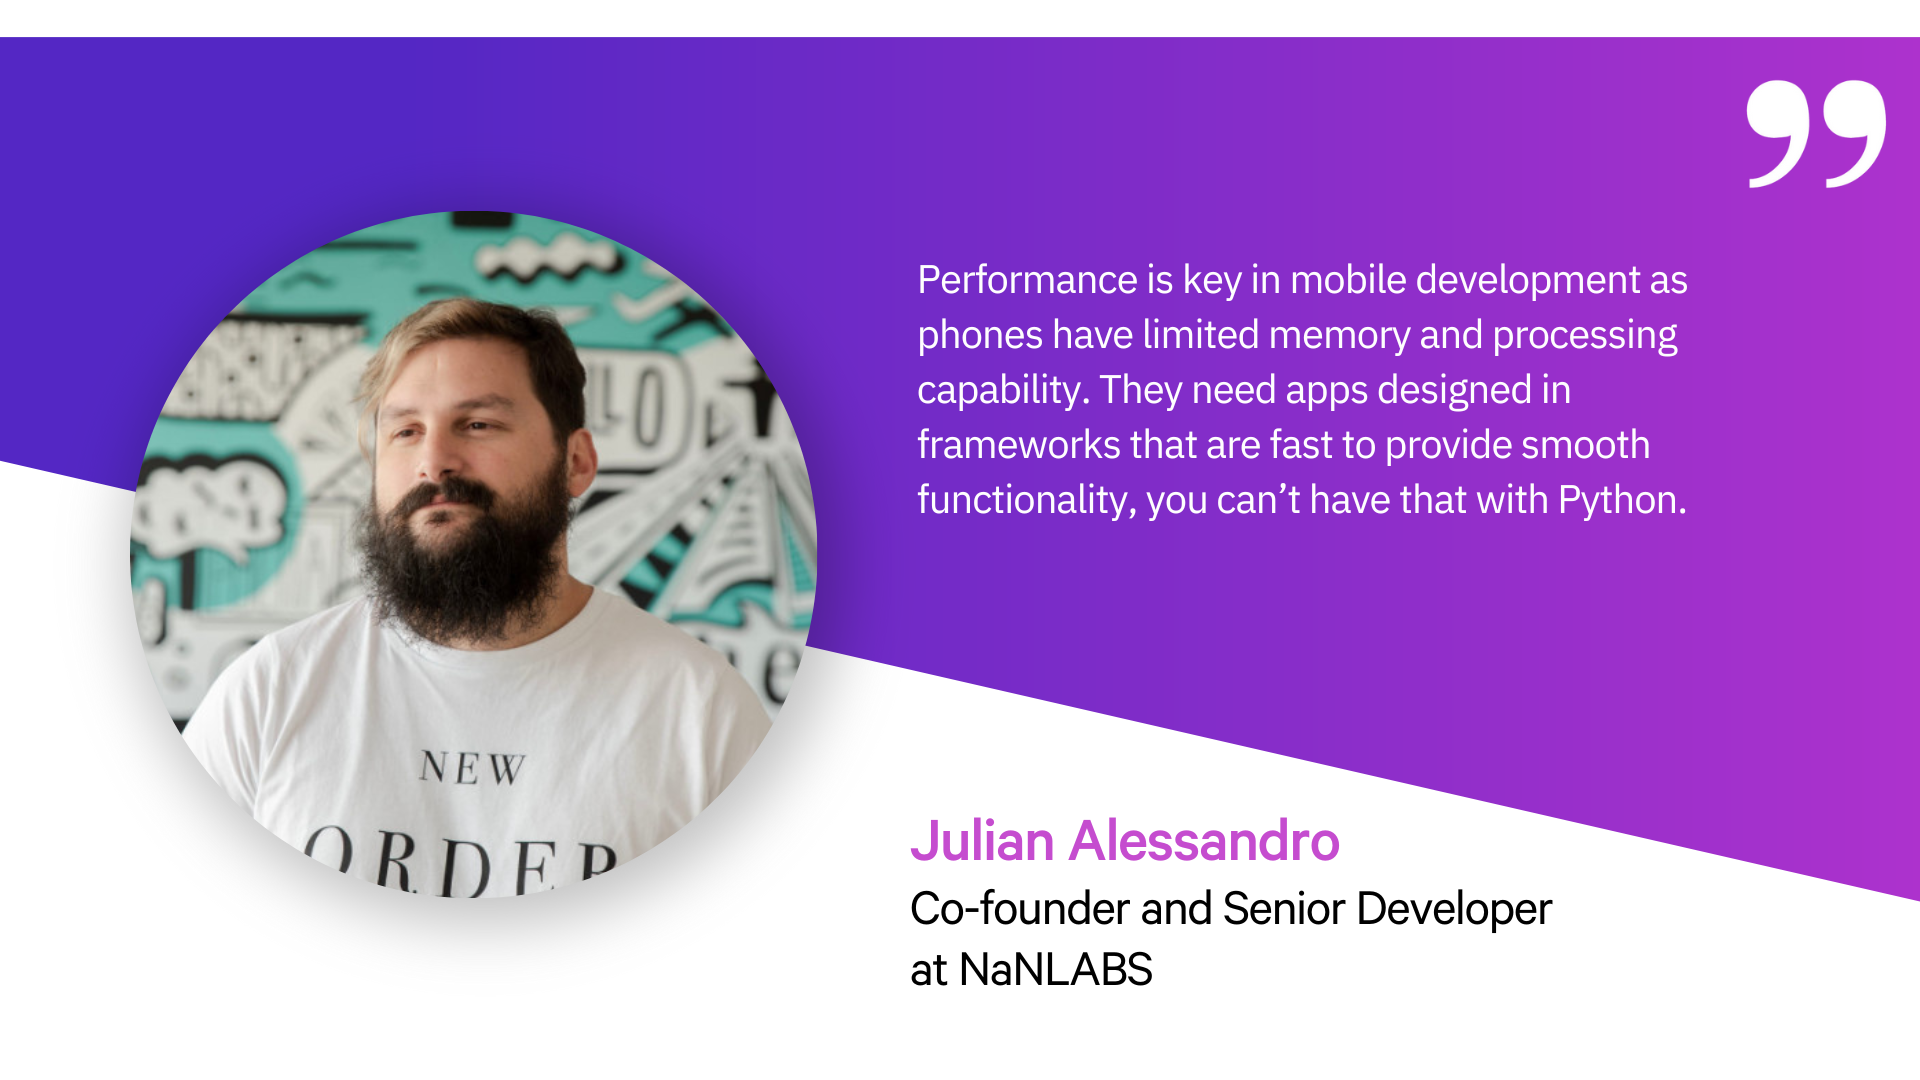 Quote by NaNLABS Senior Developer on mobile development with Python